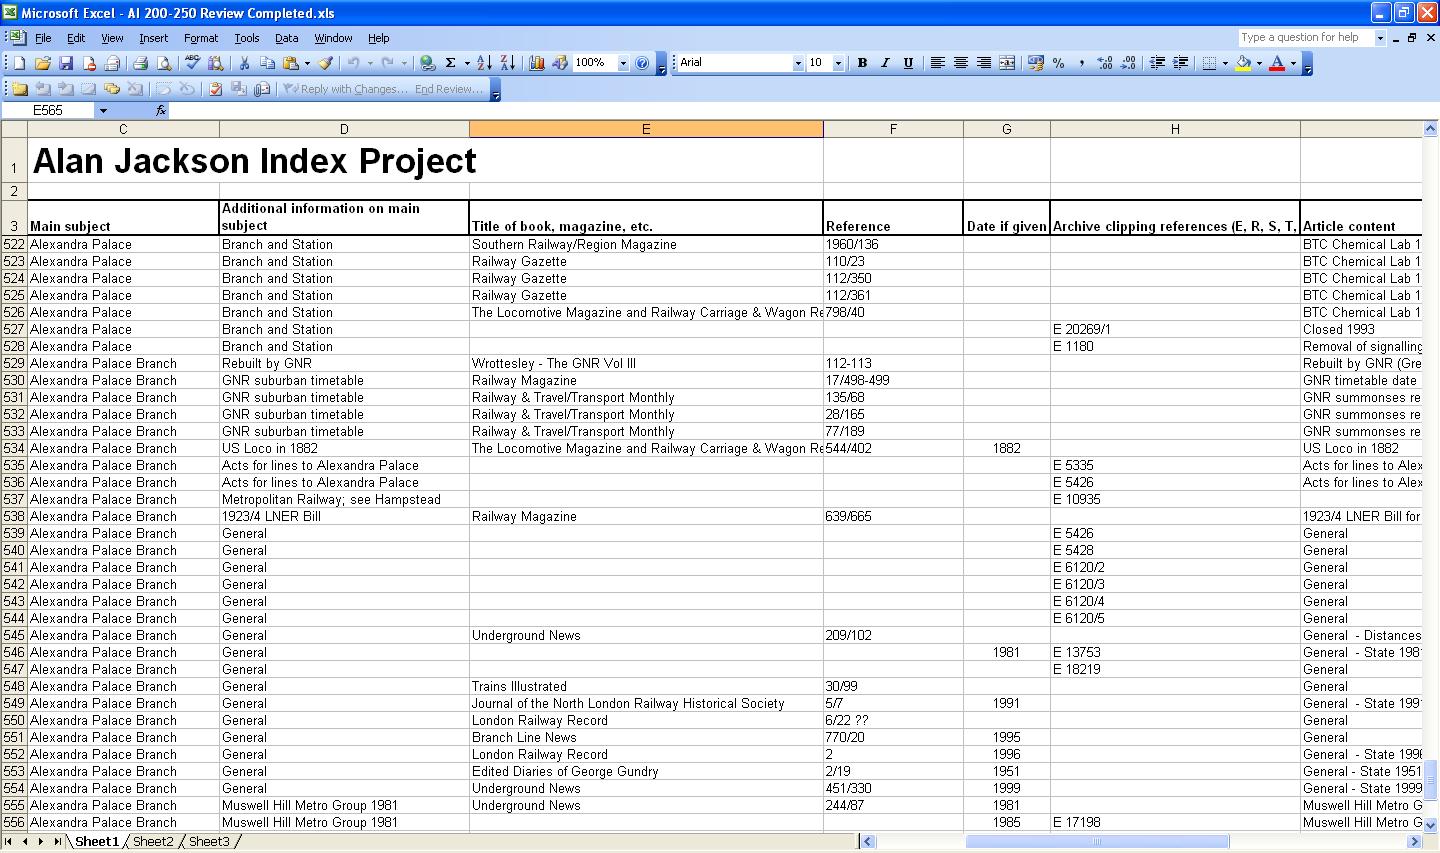 An example spreadsheet, used for transcribing data from the Alan Jackson index cards.